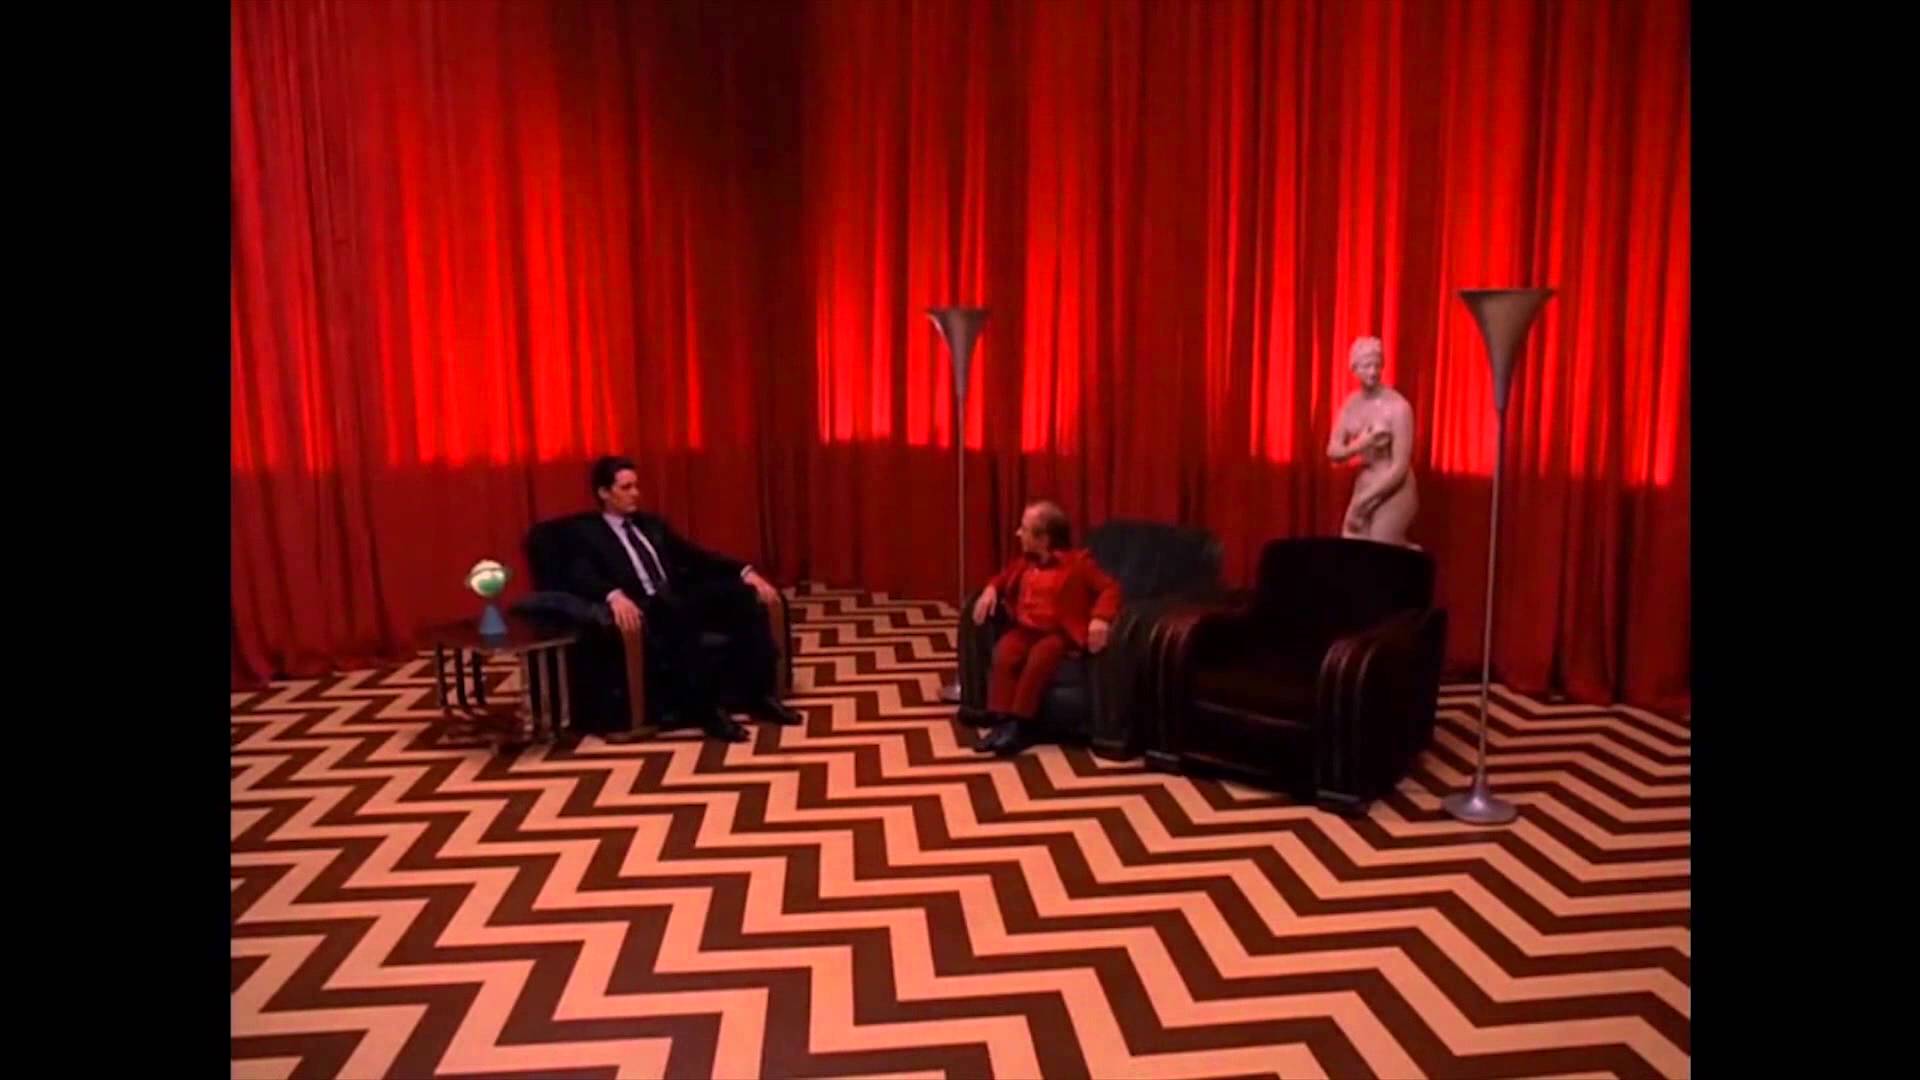 Twin Peaks - One of the weirdest and most addictive shows of all time, this creation from famed director David Lynch really had people talking. Following the murder of a beautiful high school girl, a detective played by Kyle MacLachlan descends into a sinister and bizarre world in small town America. This show had people saying the next day, "What the hell happened on that show last night?"